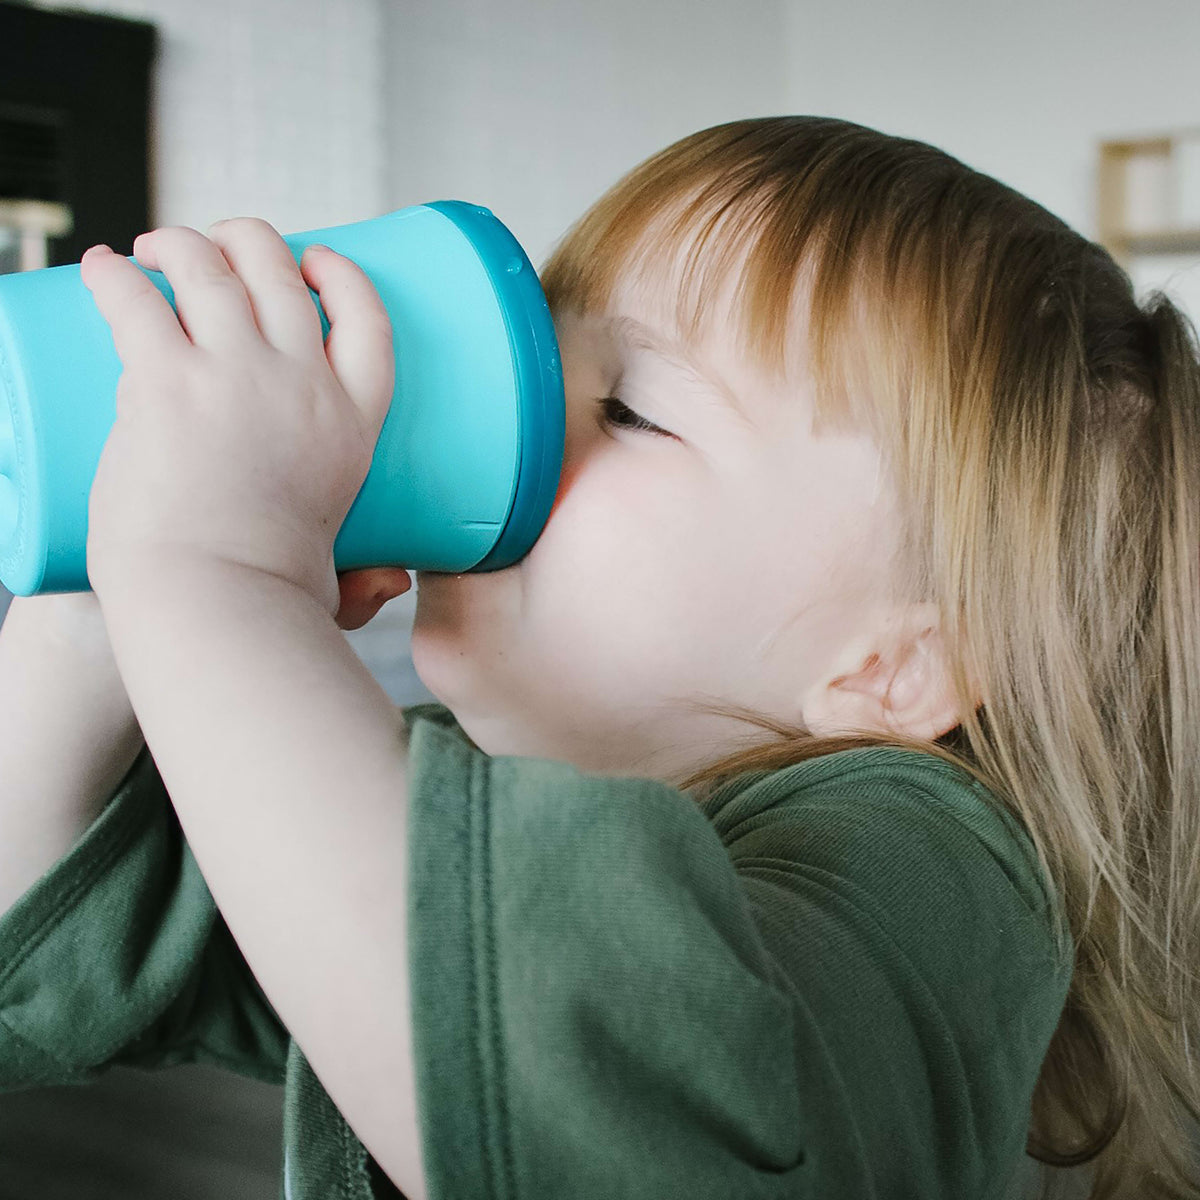 Silicone Baby Drinking Cup with Cap and Foldable Straw Toddler Straw Cup